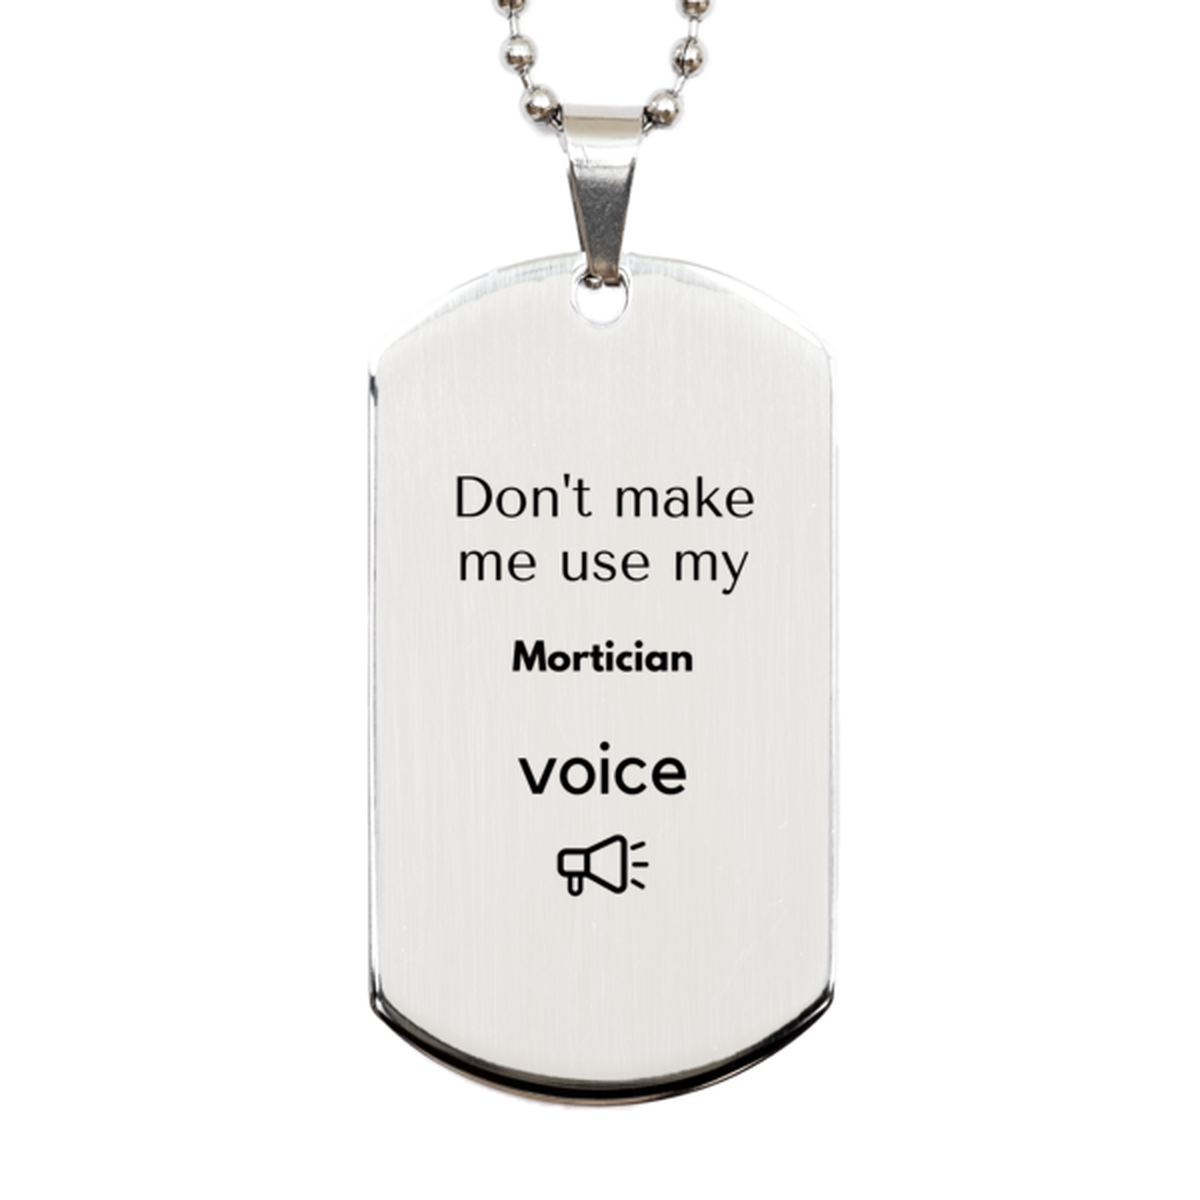 Don't make me use my Mortician voice, Sarcasm Mortician Gifts, Christmas Mortician Silver Dog Tag Birthday Unique Gifts For Mortician Coworkers, Men, Women, Colleague, Friends